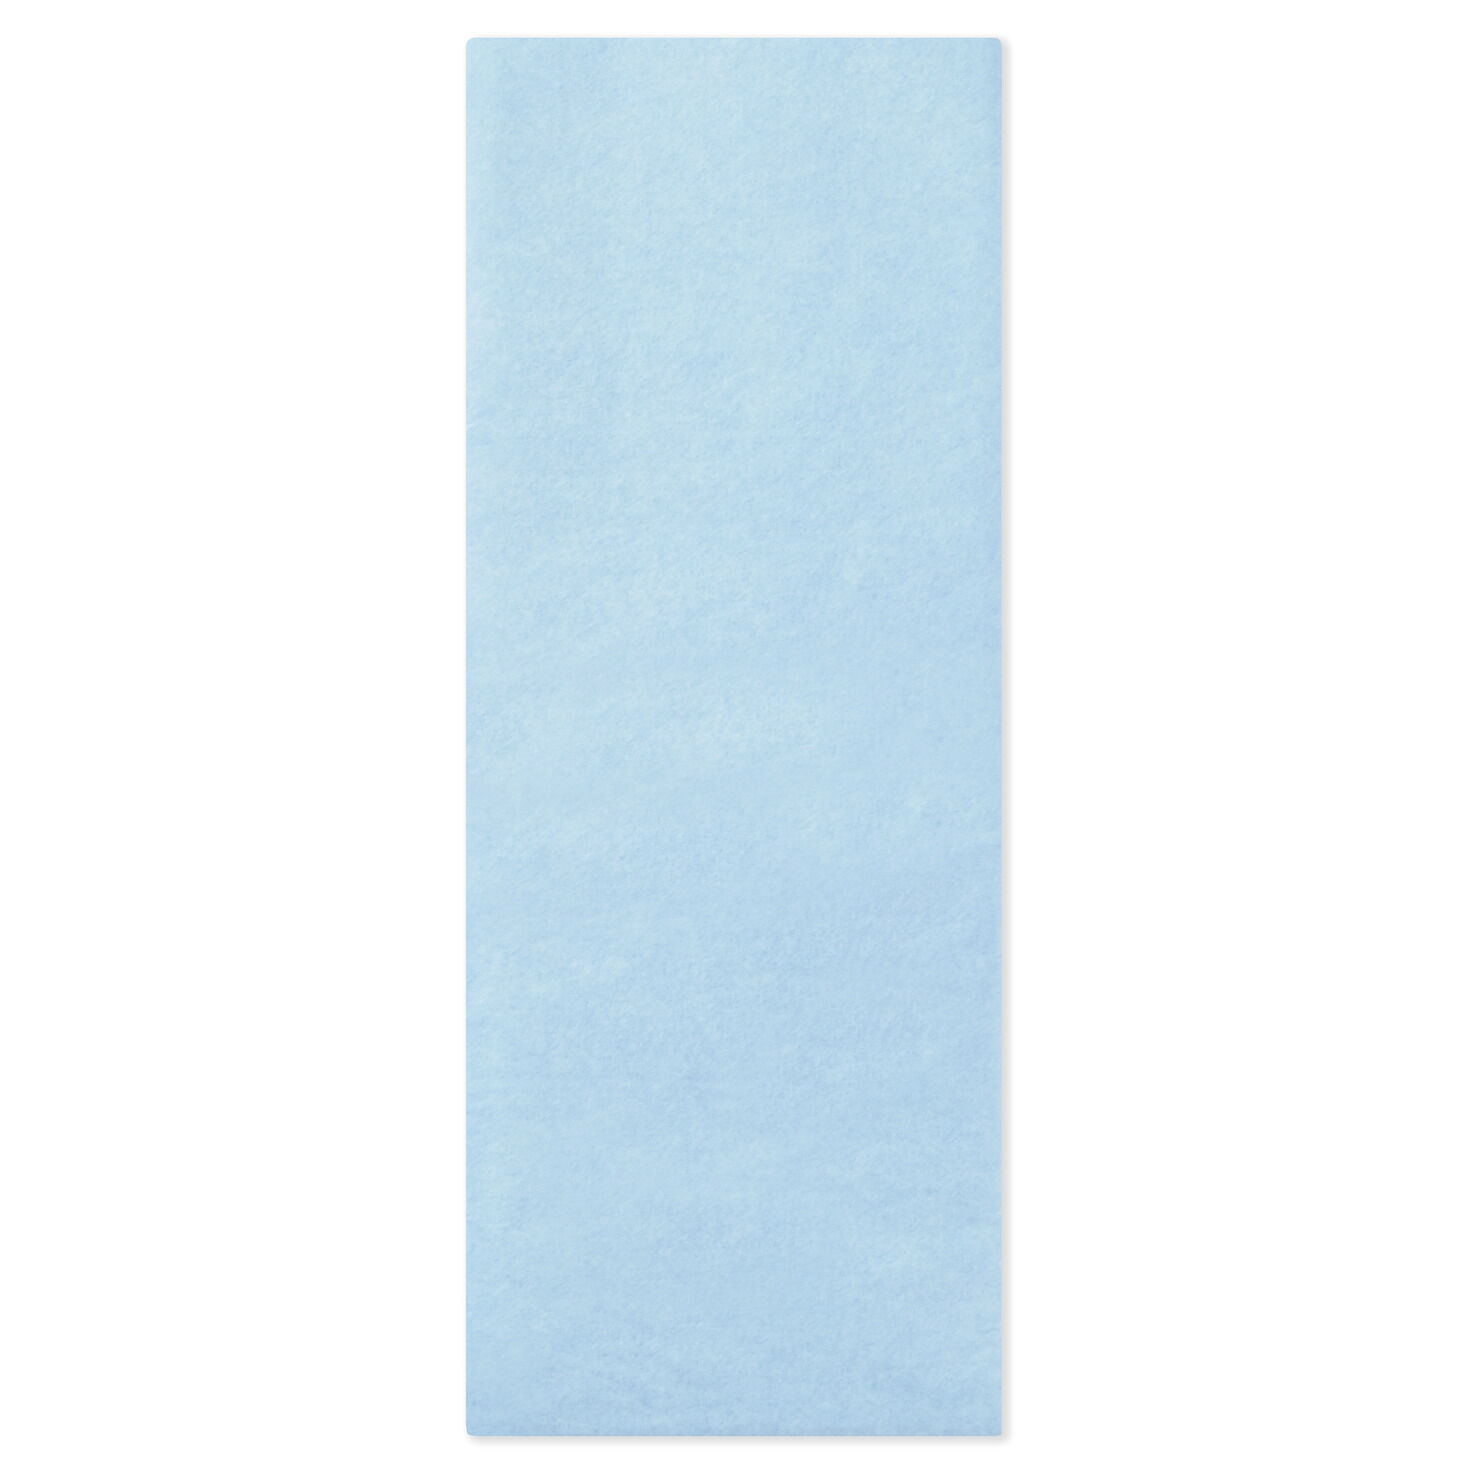 Pale Blue Tissue Paper, 8 sheets for only USD 1.99 | Hallmark